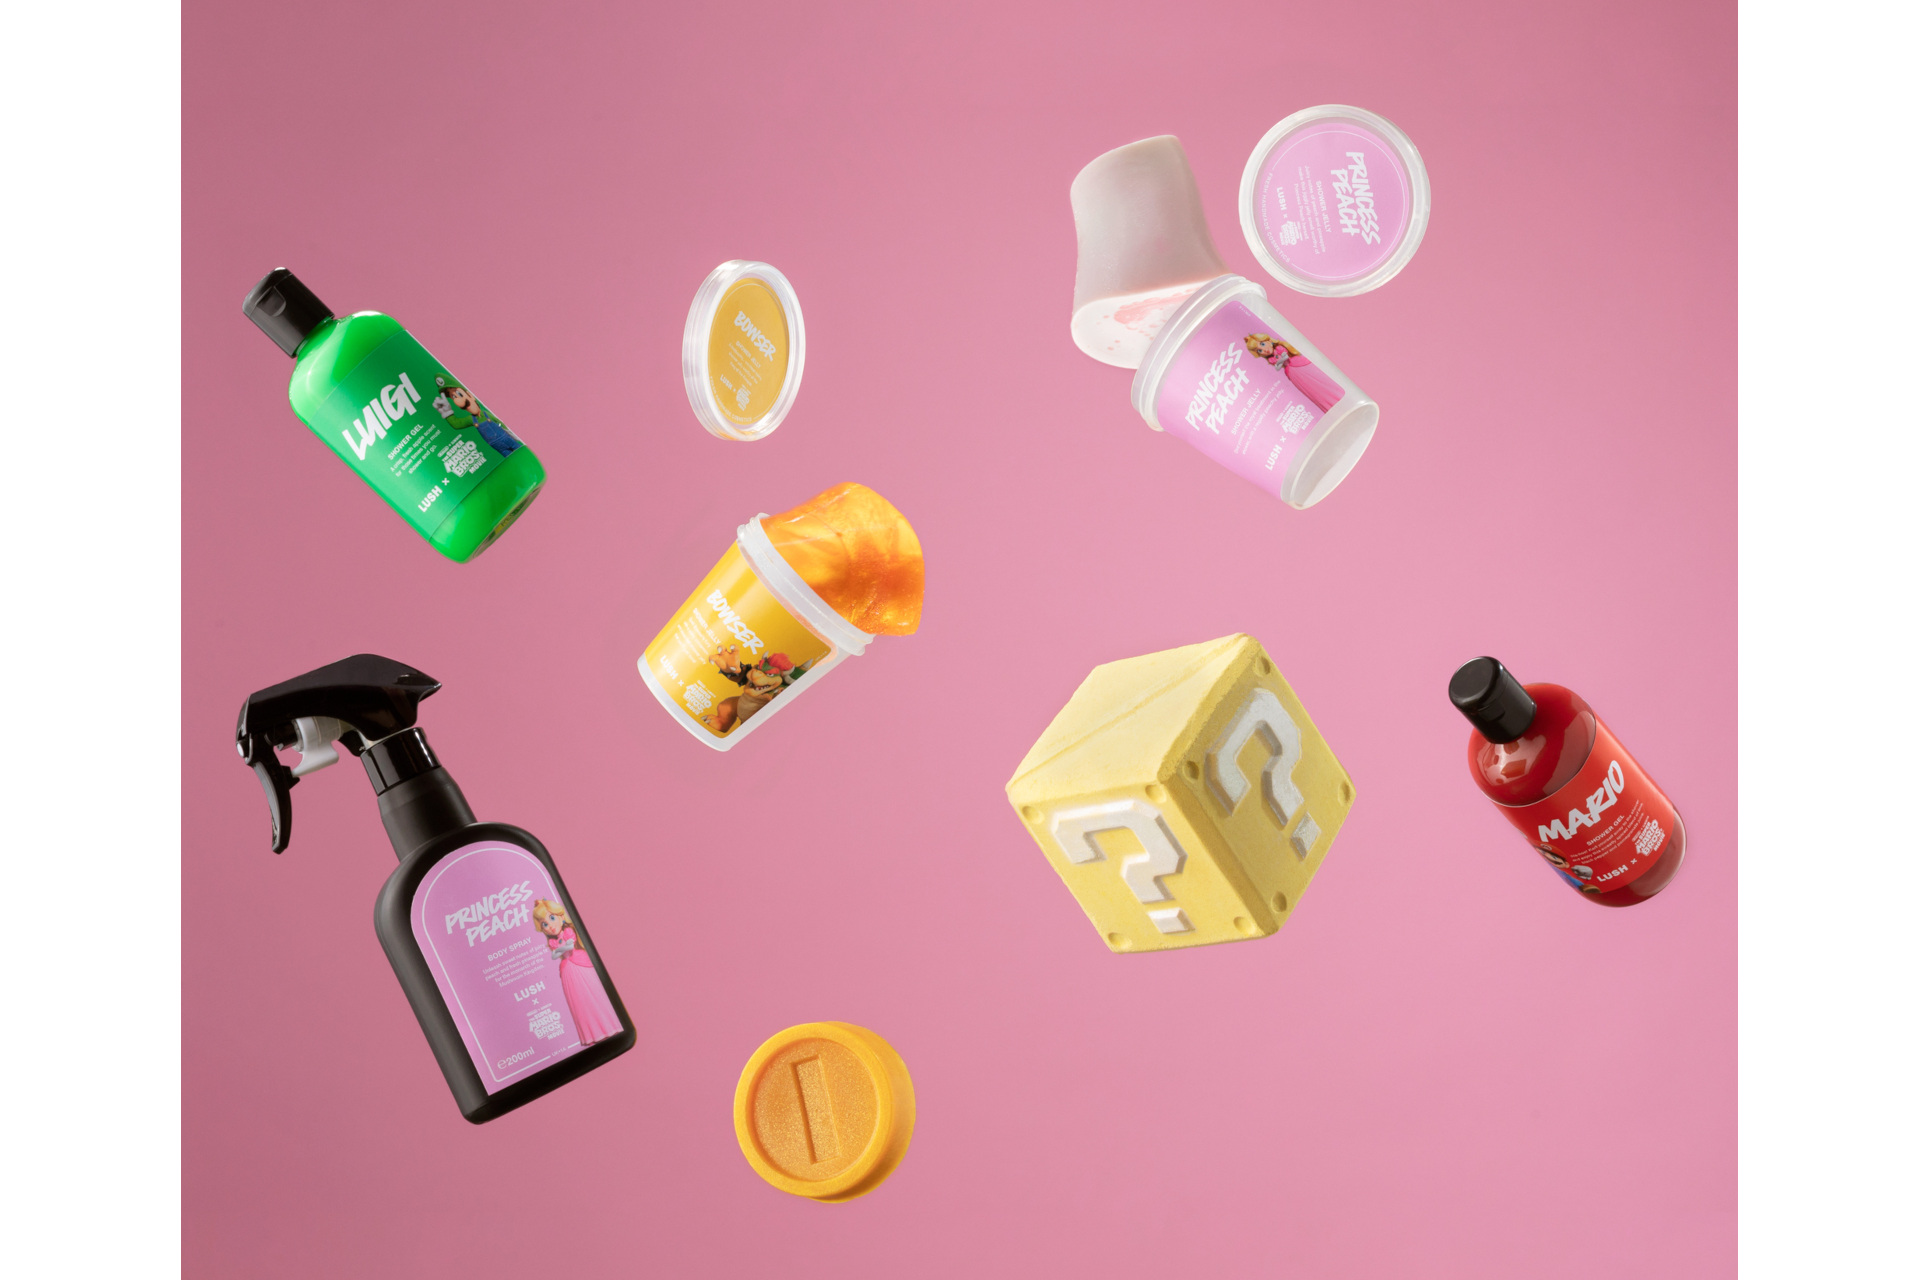 Lush x Super Mario Bros products falling through air in front of pink background